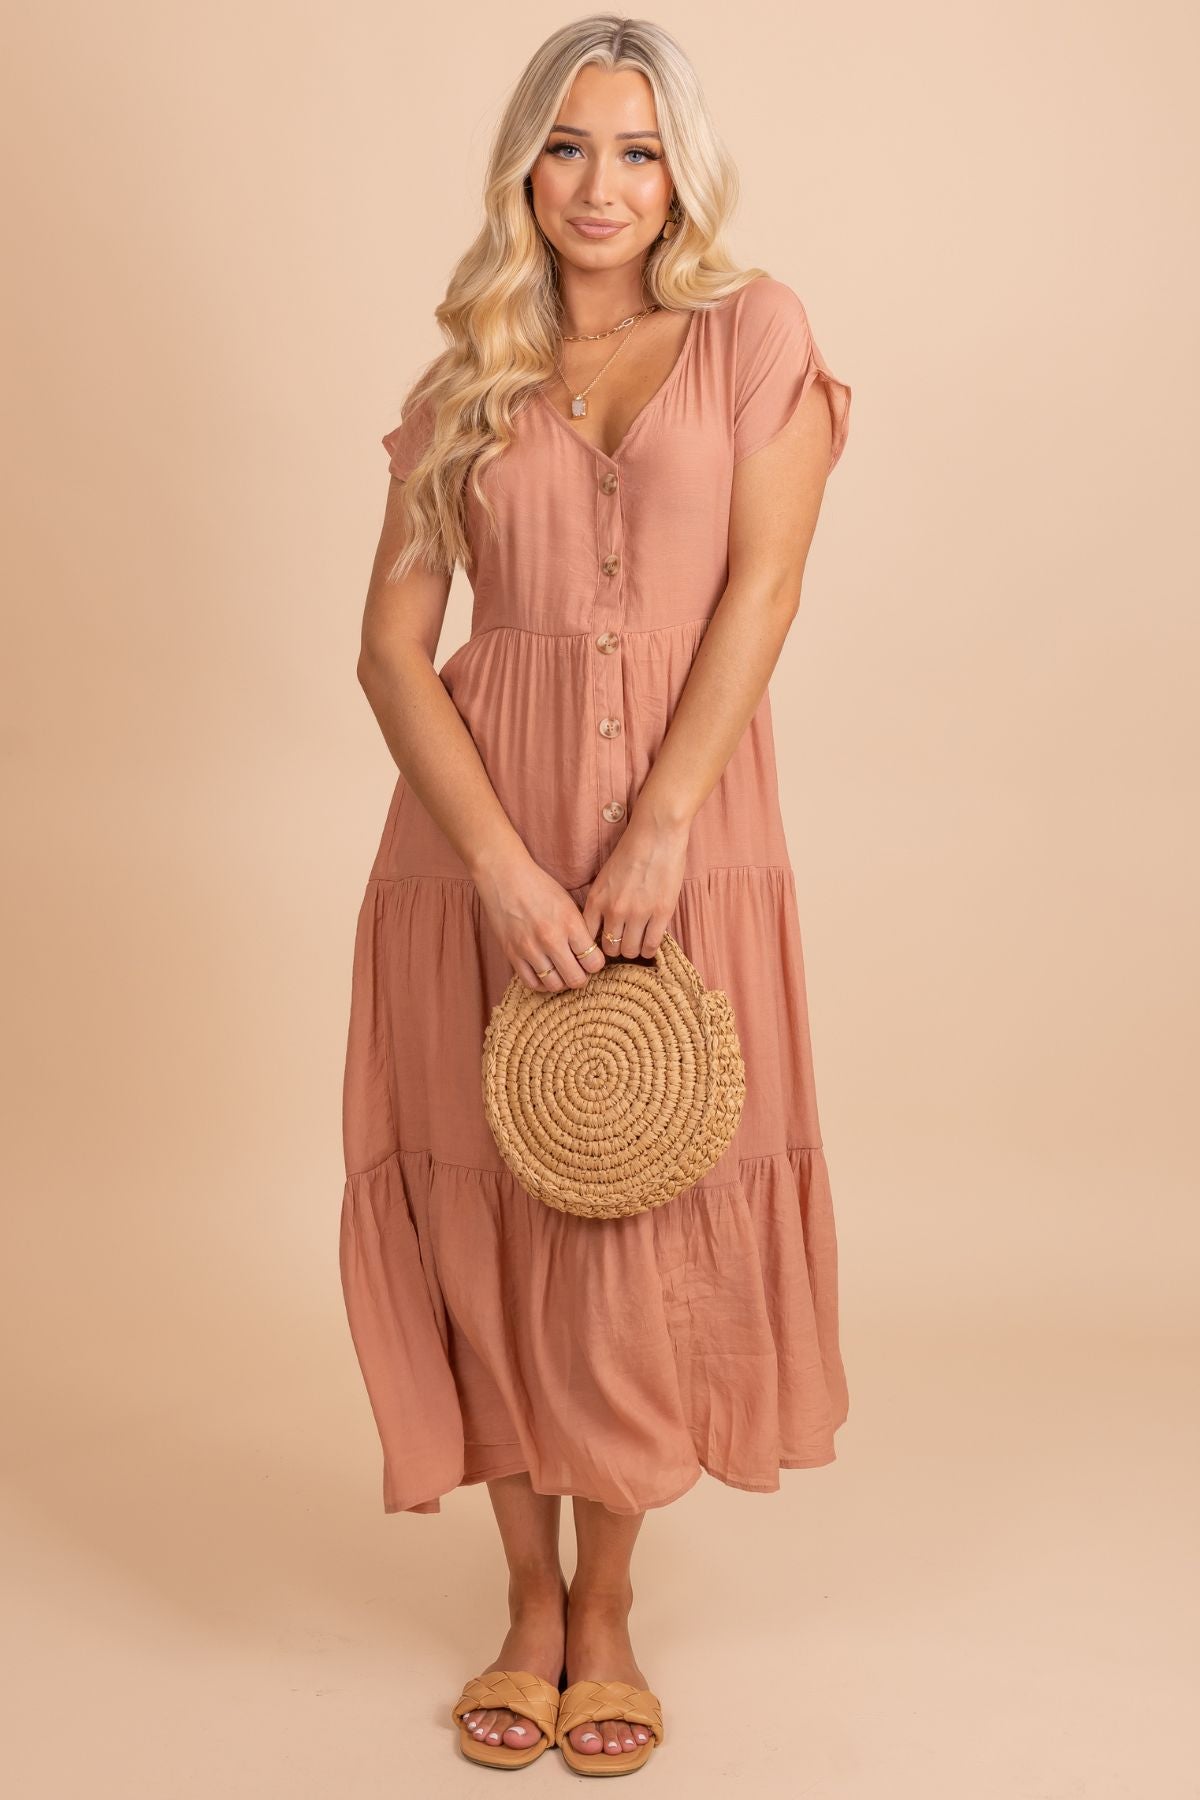 Light Pink Tiered Style Boutique Midi Dresses for Women